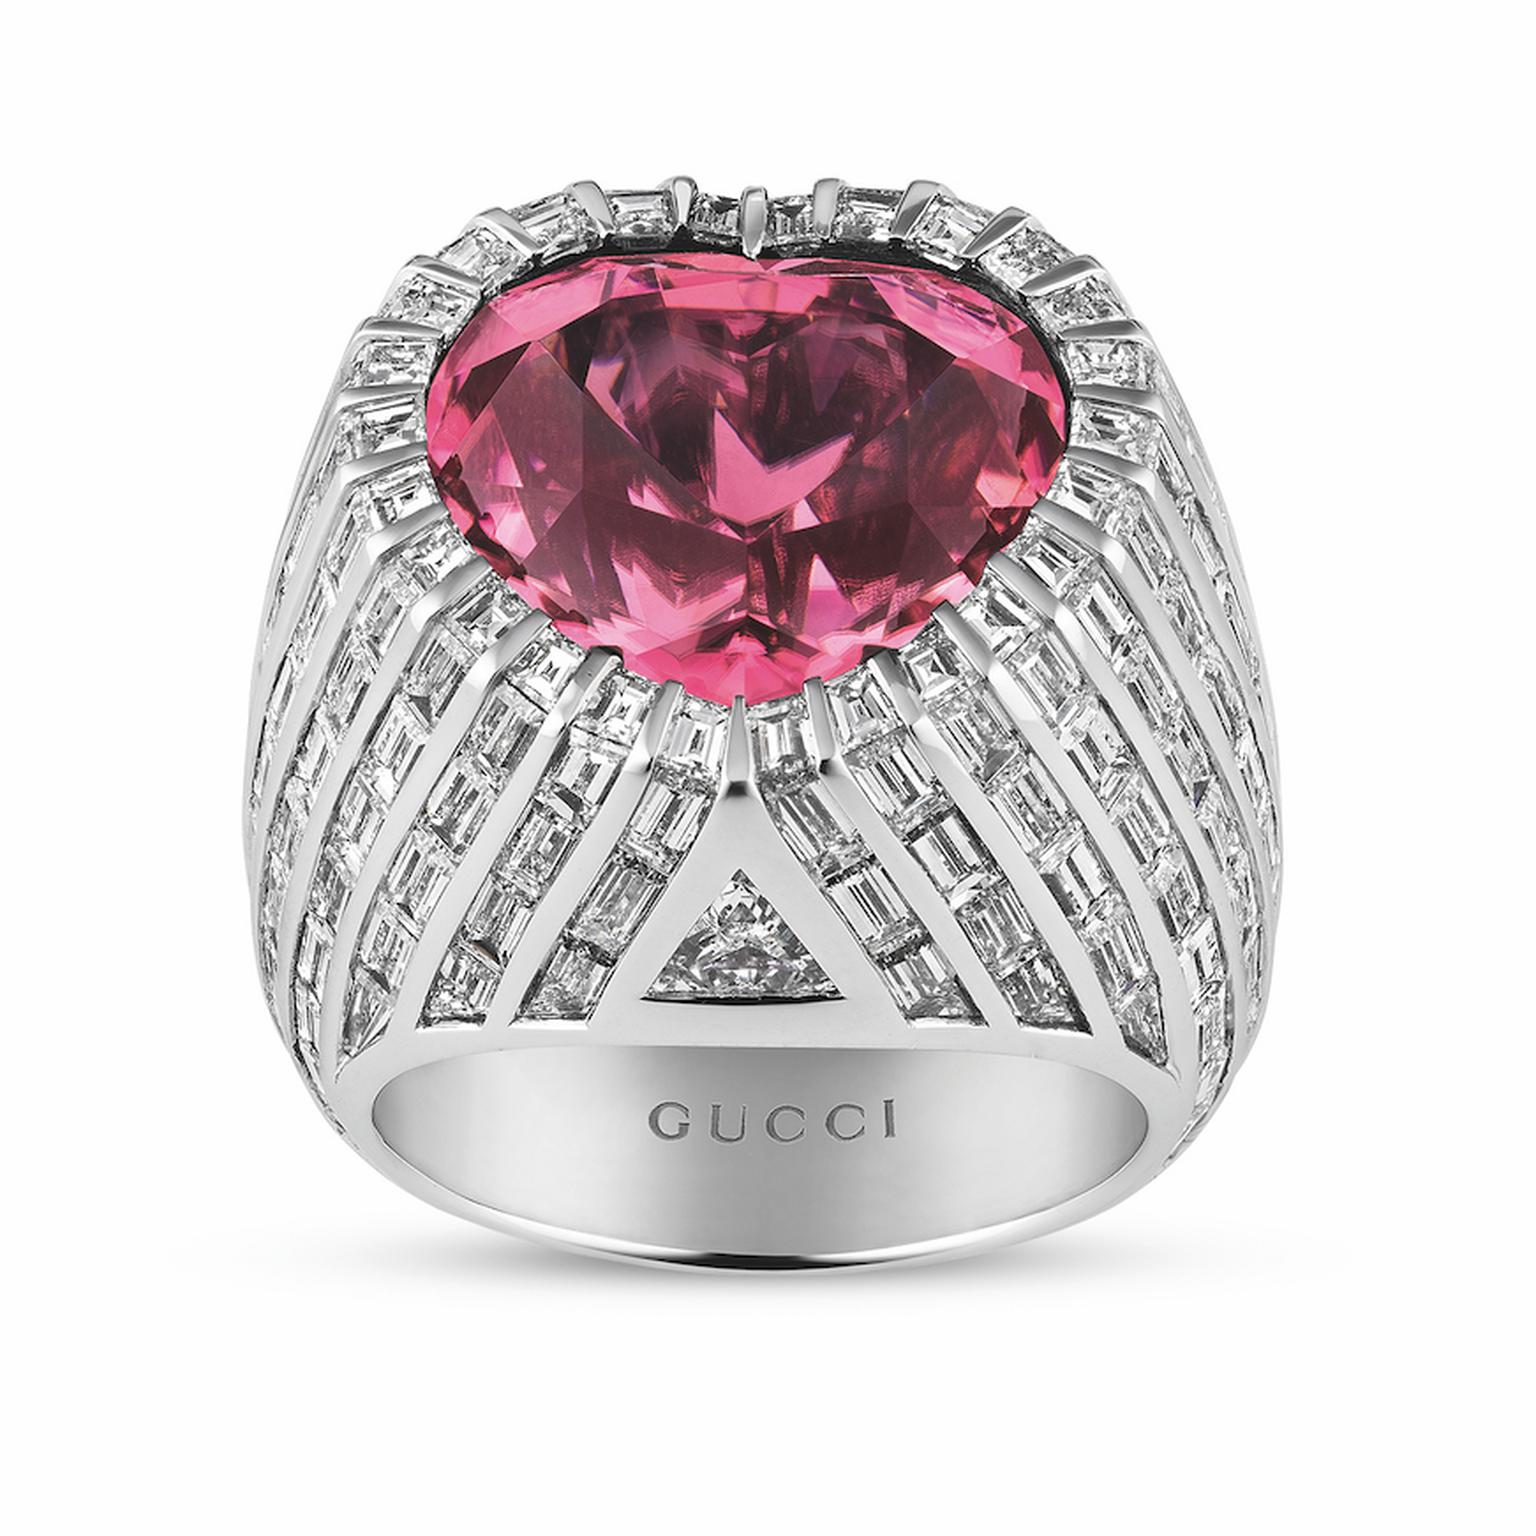 Hortus Deliciarum high jewellery heart shape ring by Gucci 